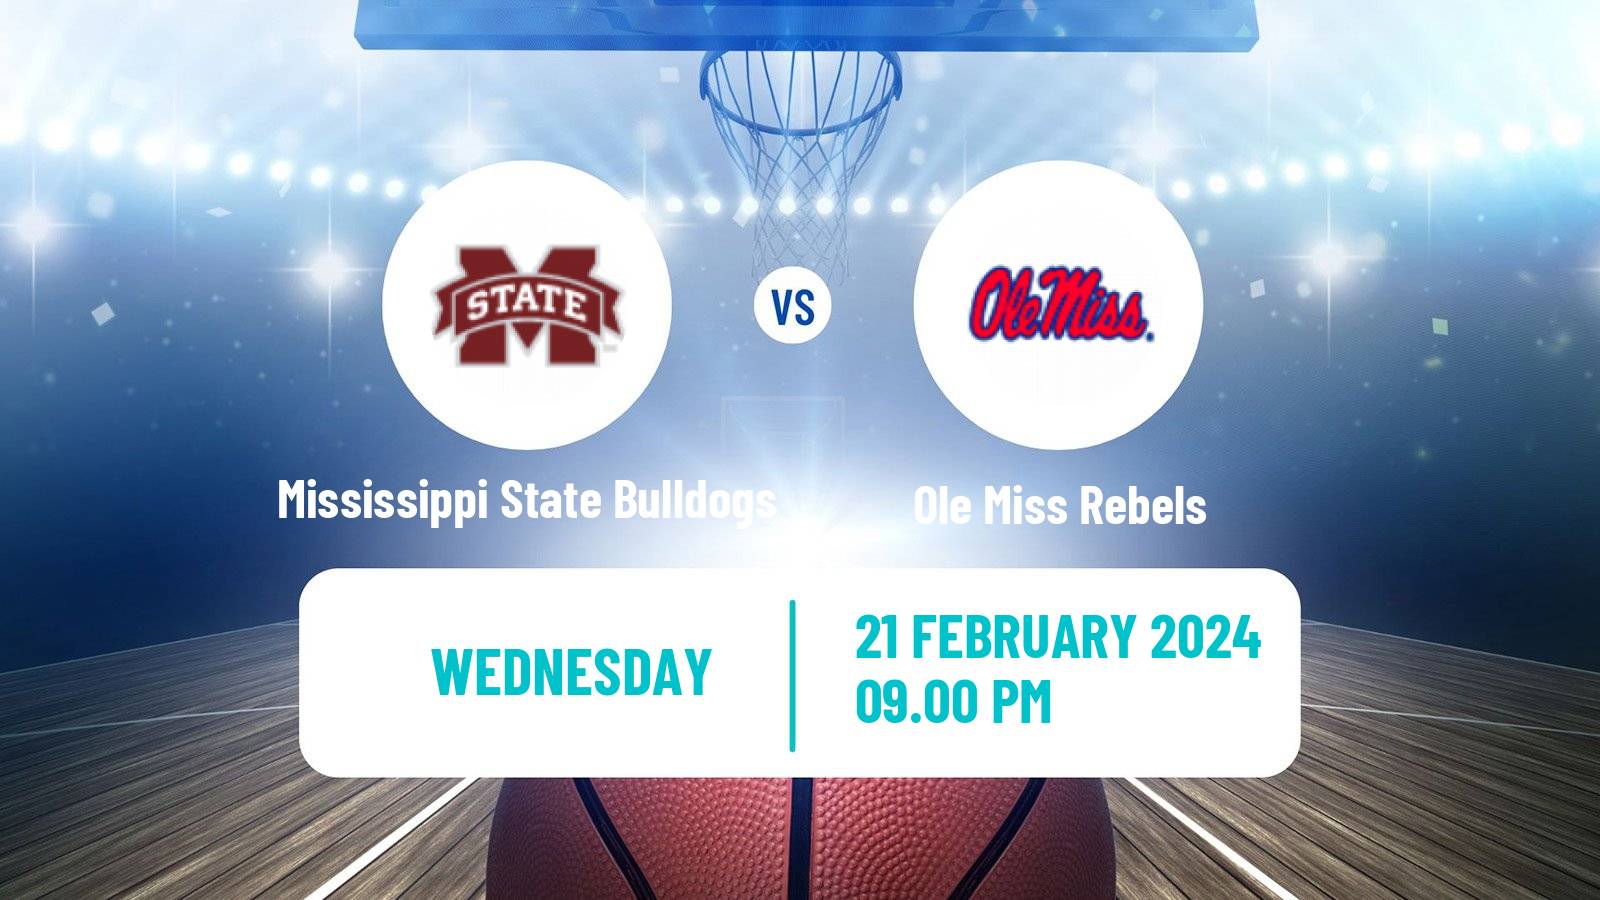 Basketball NCAA College Basketball Mississippi State Bulldogs - Ole Miss Rebels